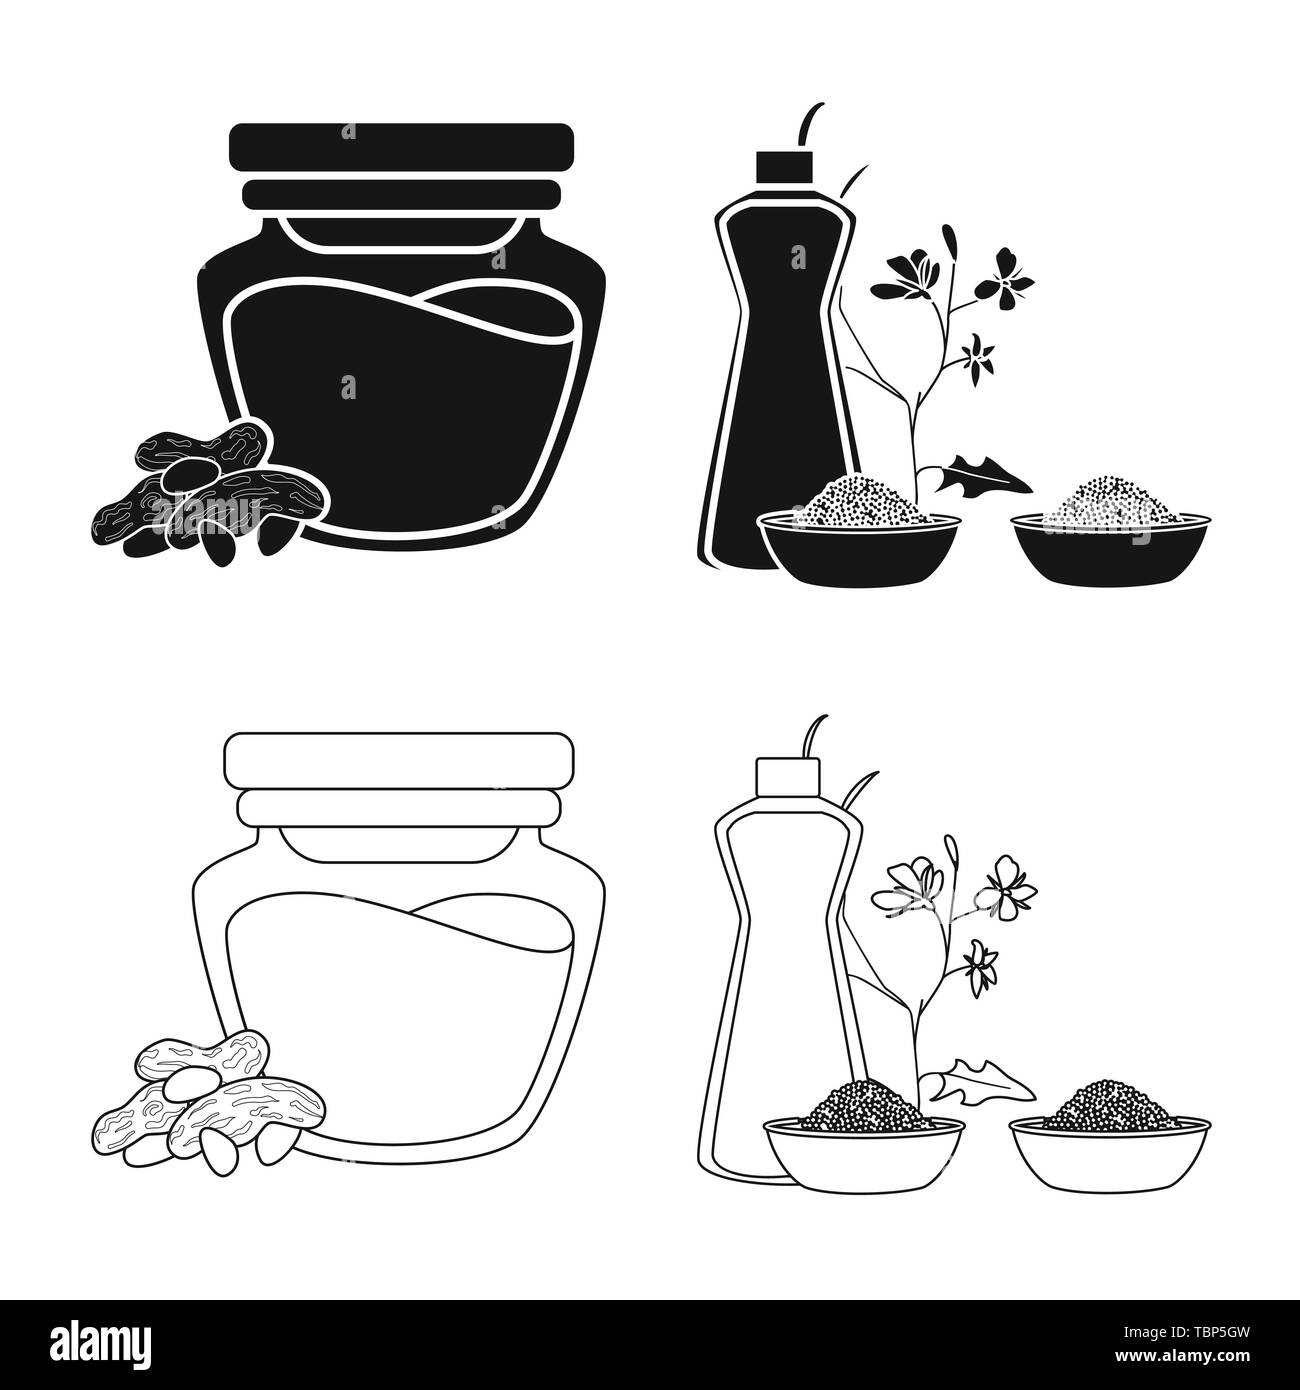 peanut,mustard,butter,rapeseed,food,seed,calcium,bio,nutty,blossom,spread,botanical,aroma,green,natural,plant,crunchy,flower,plastic,healthy,vegetable,oil,agriculture,bottle,glass,cooking,crop,nutrition,organics,set,vector,icon,illustration,isolated,collection,design,element,graphic,sign, Vector Vectors , Stock Vector